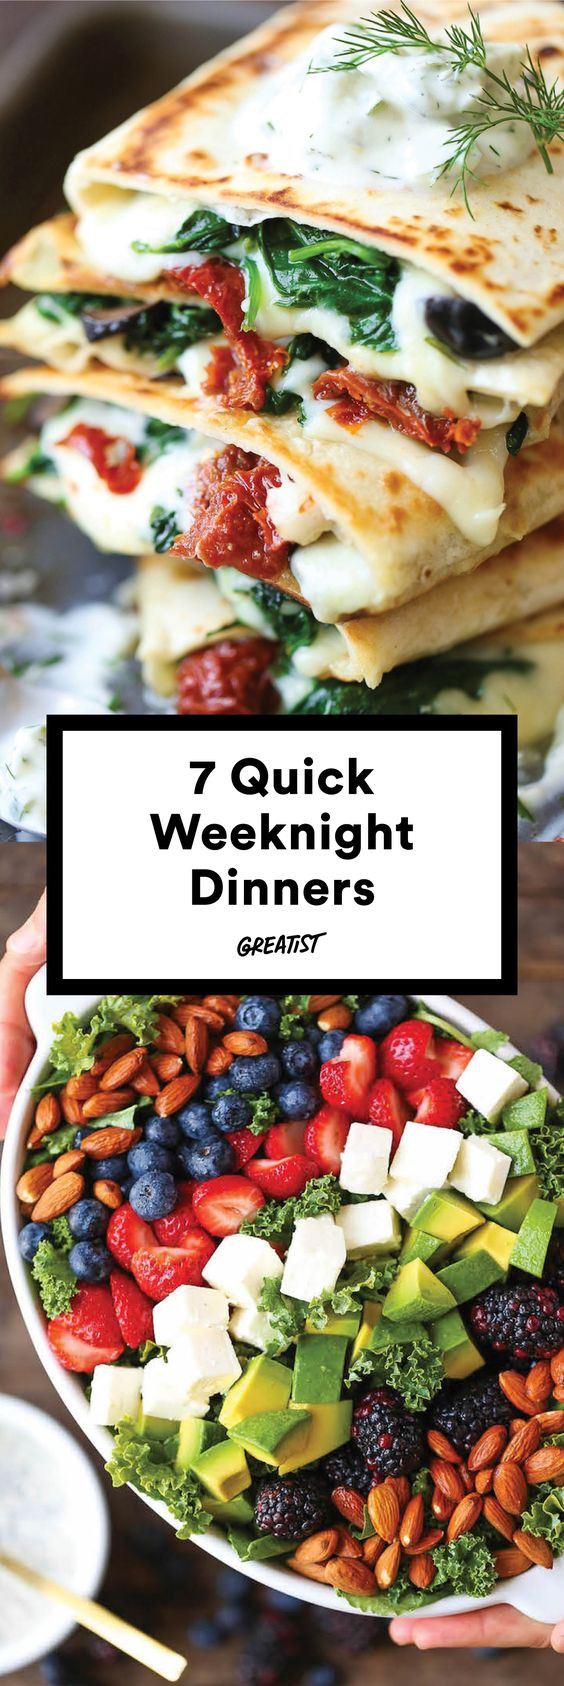 Healthy Weeknight Dinners For Families
 7 Quick Fix Dinners That Make Weeknight Cooking a Cinch